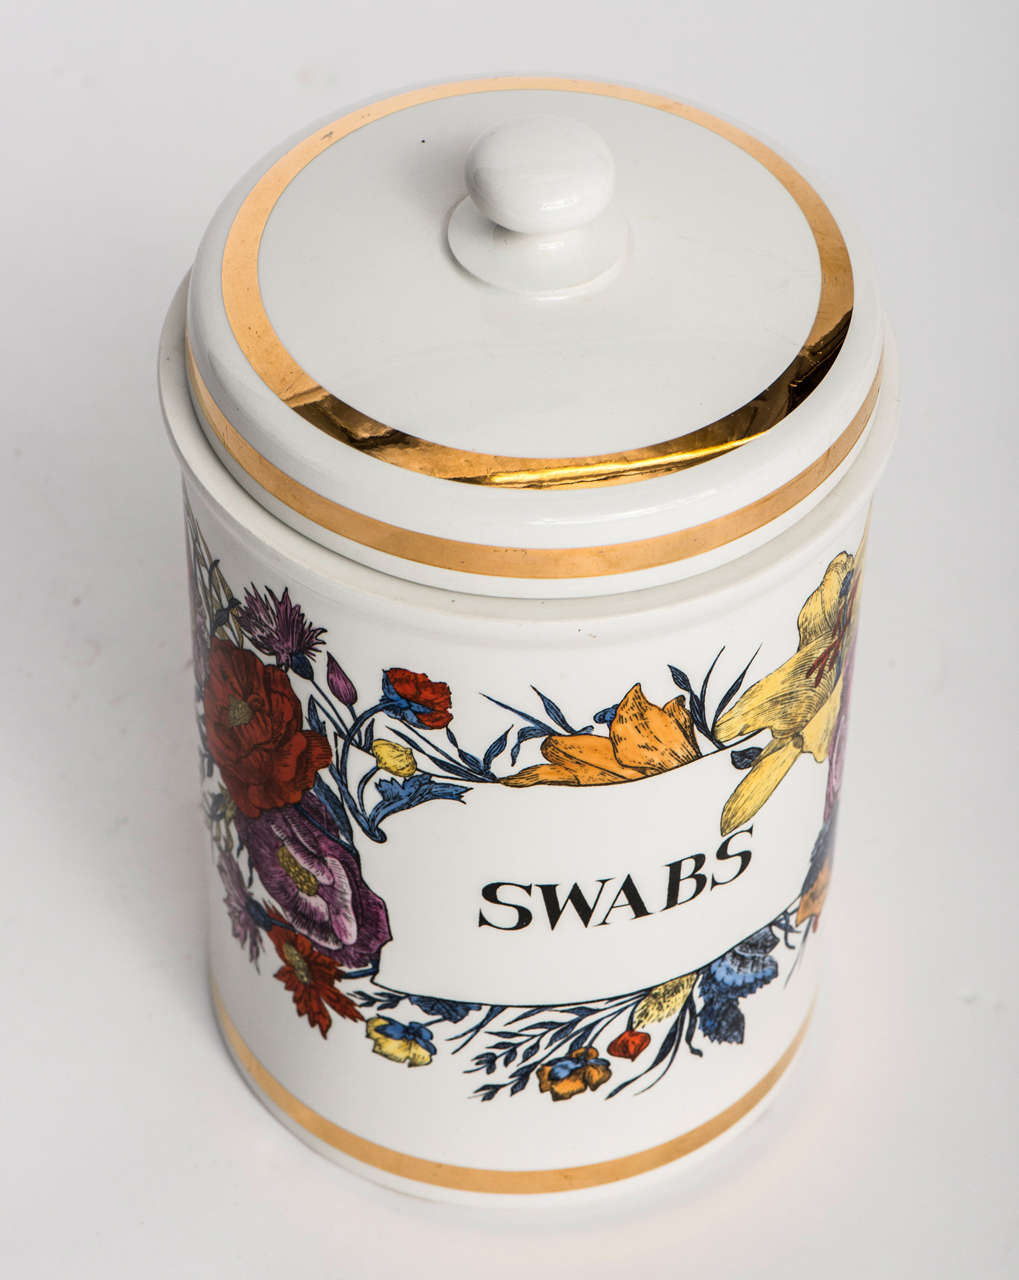 A Porcelain Swabs Jar and Cover by Piero Fornasetti. 2